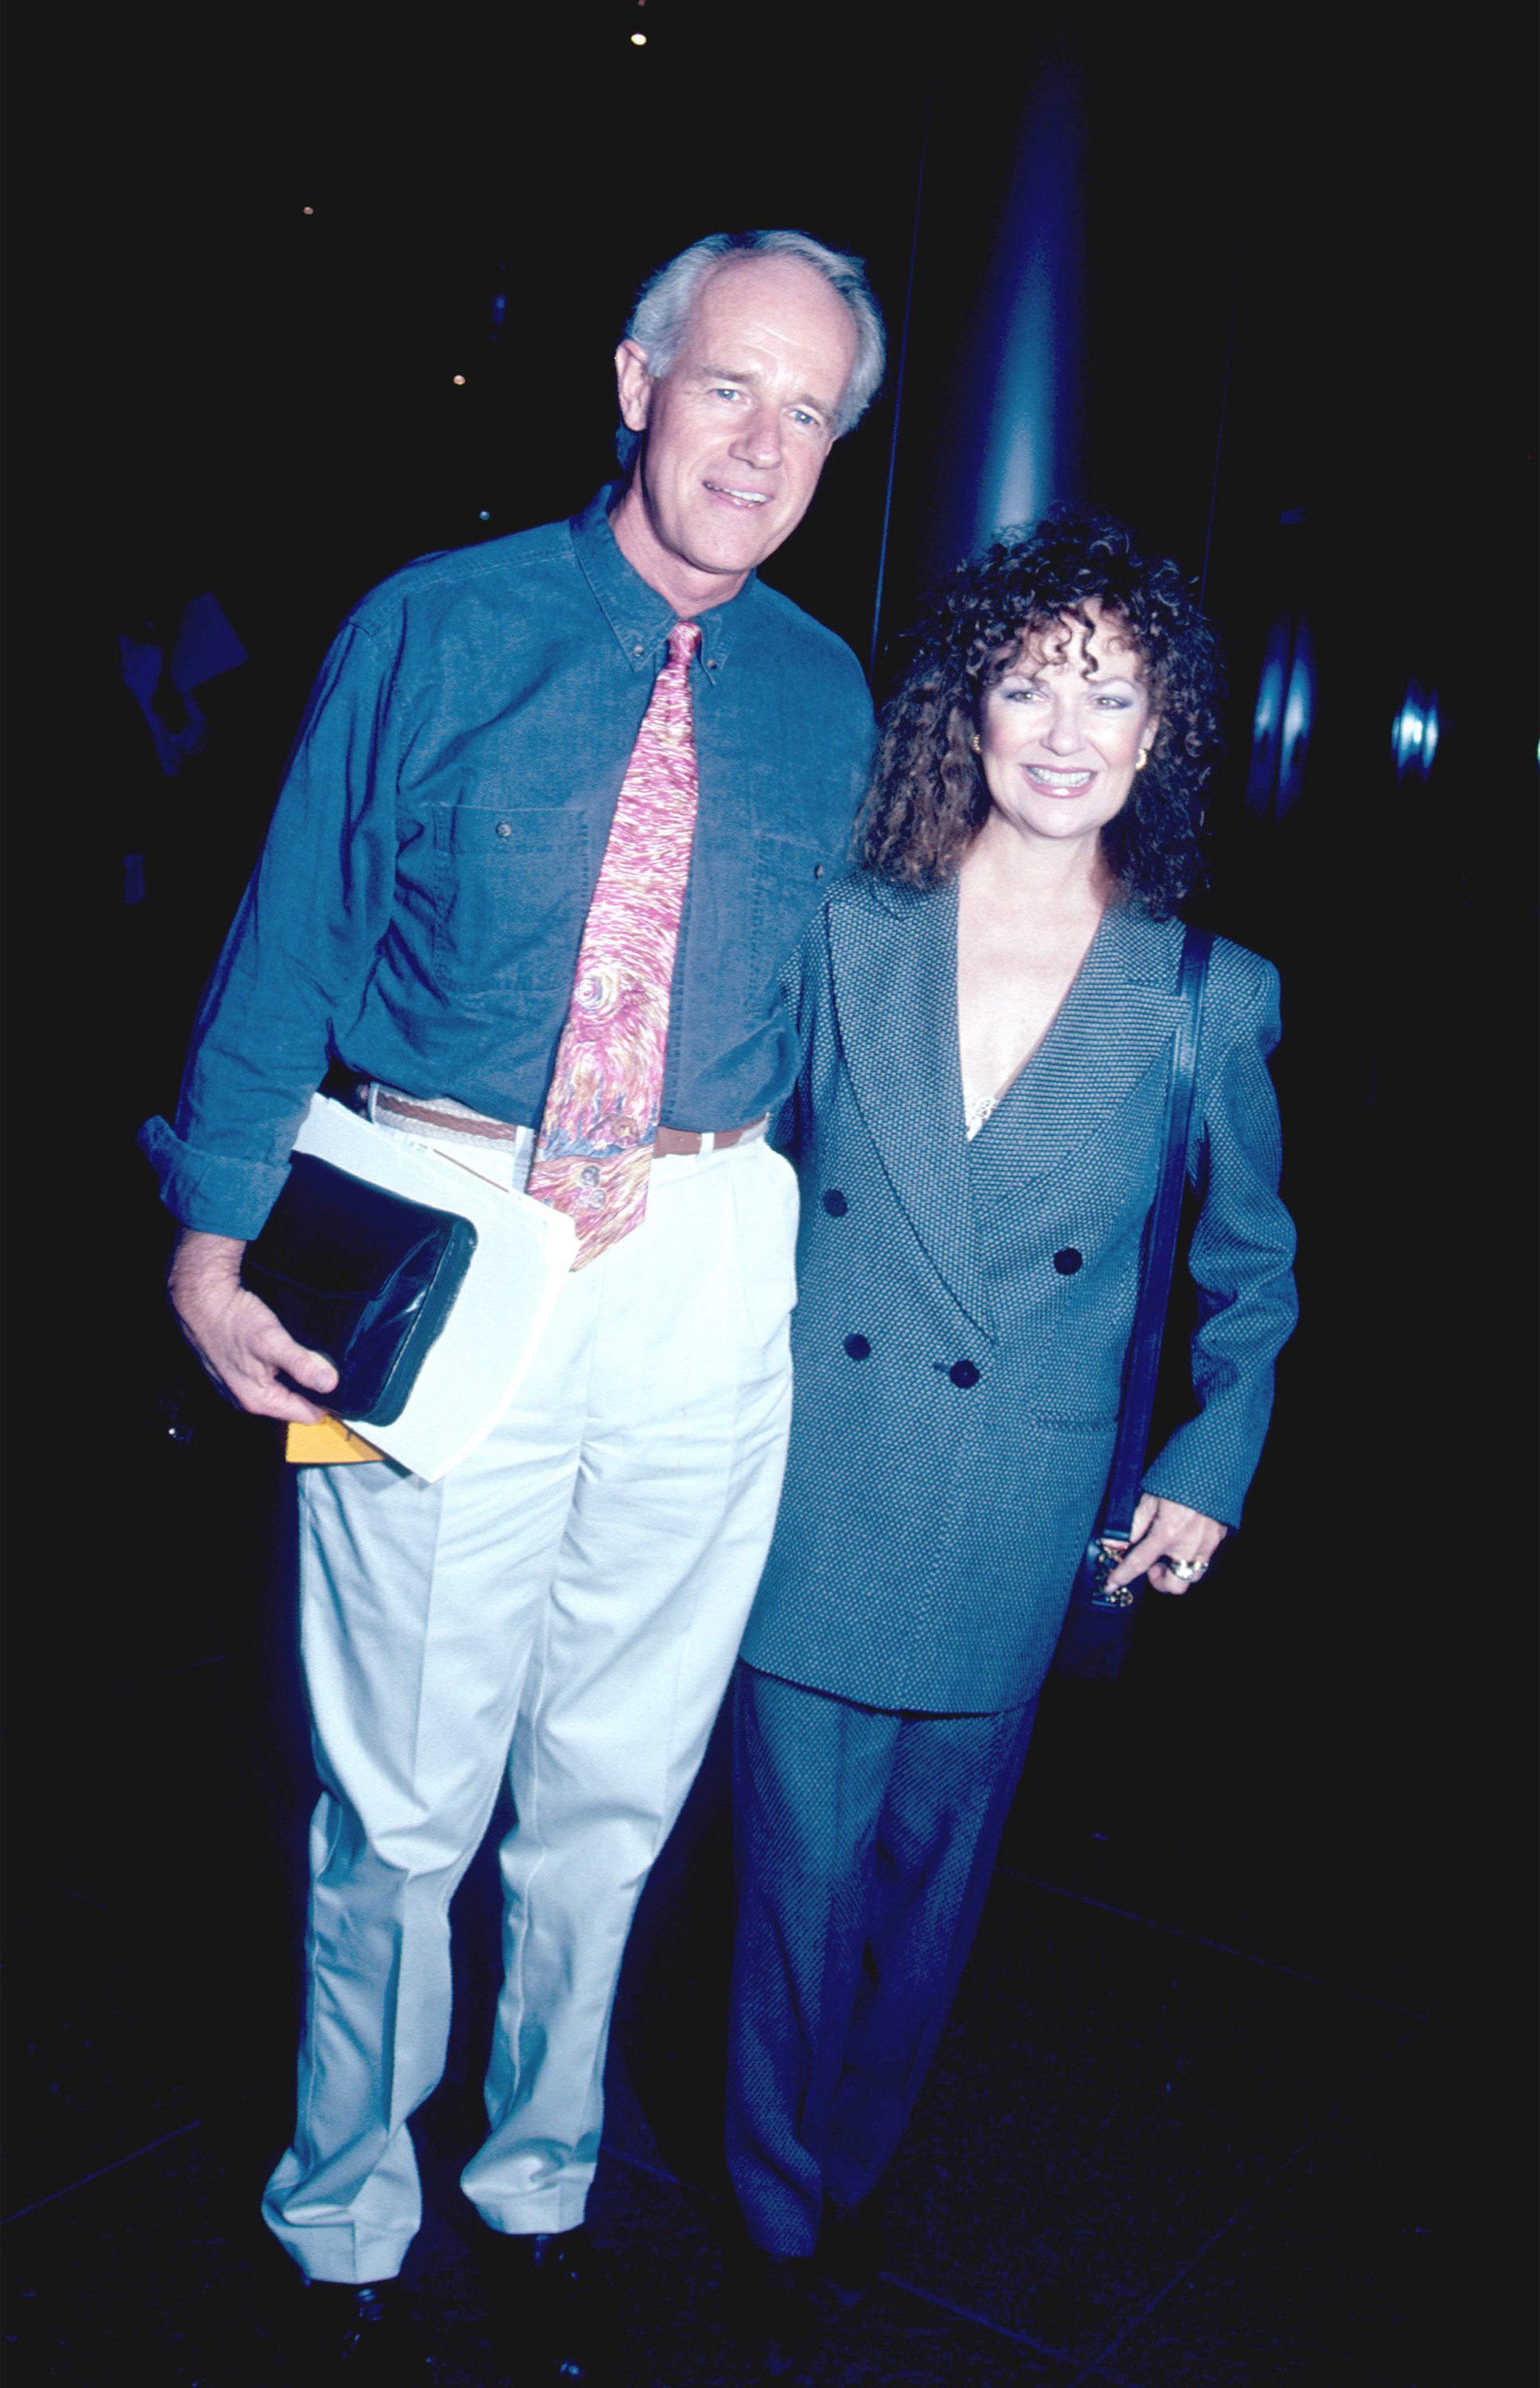 Mike Farrell and Shelley Fabares attend the screening of "Bopha," on September 21, 1993 in Los Angeles, California. | Source: Getty Images